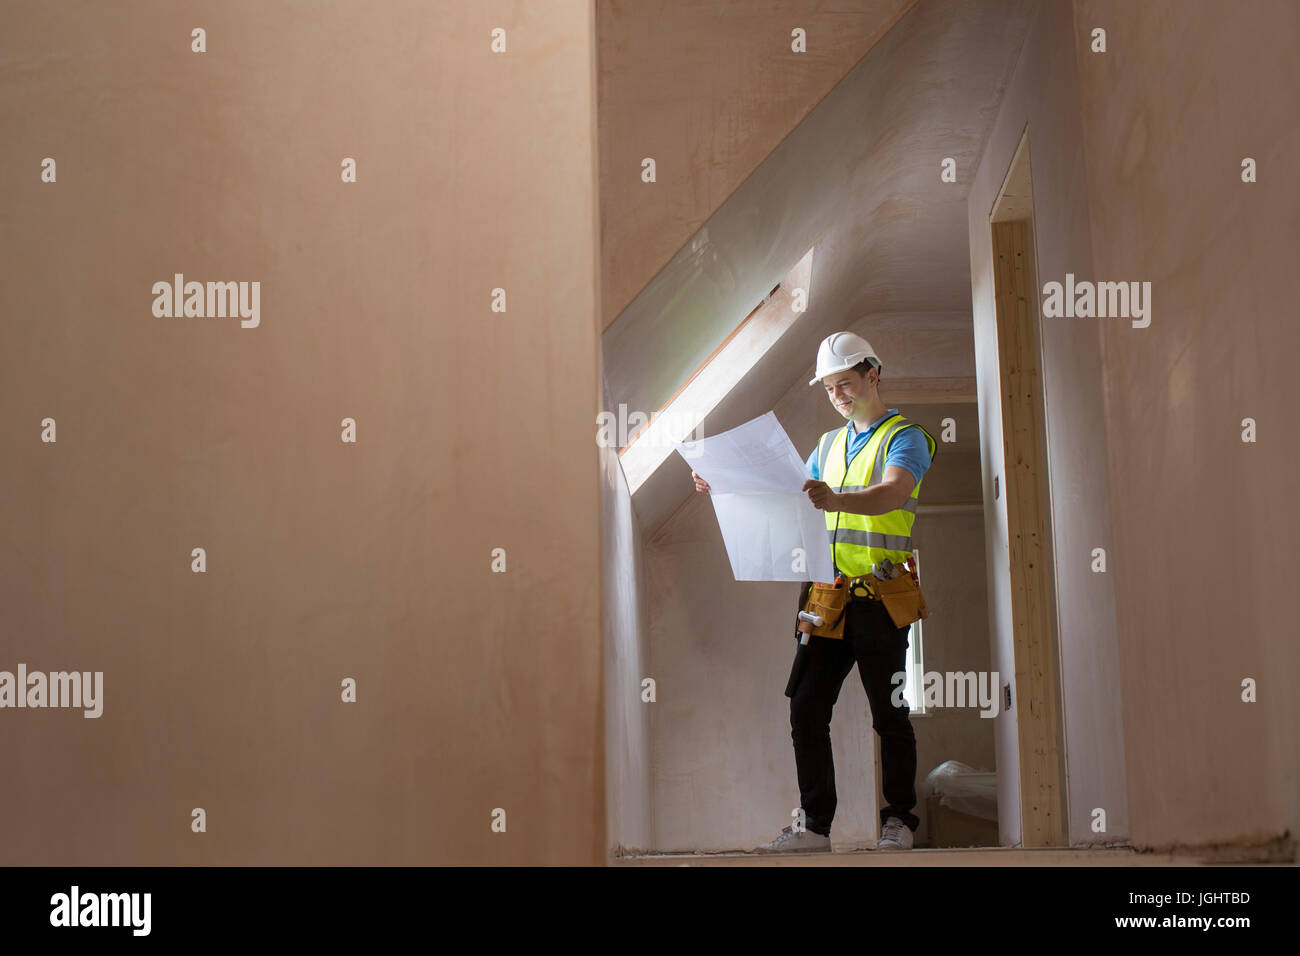 Architect On Building Site Looking At House Plans Stock Photo